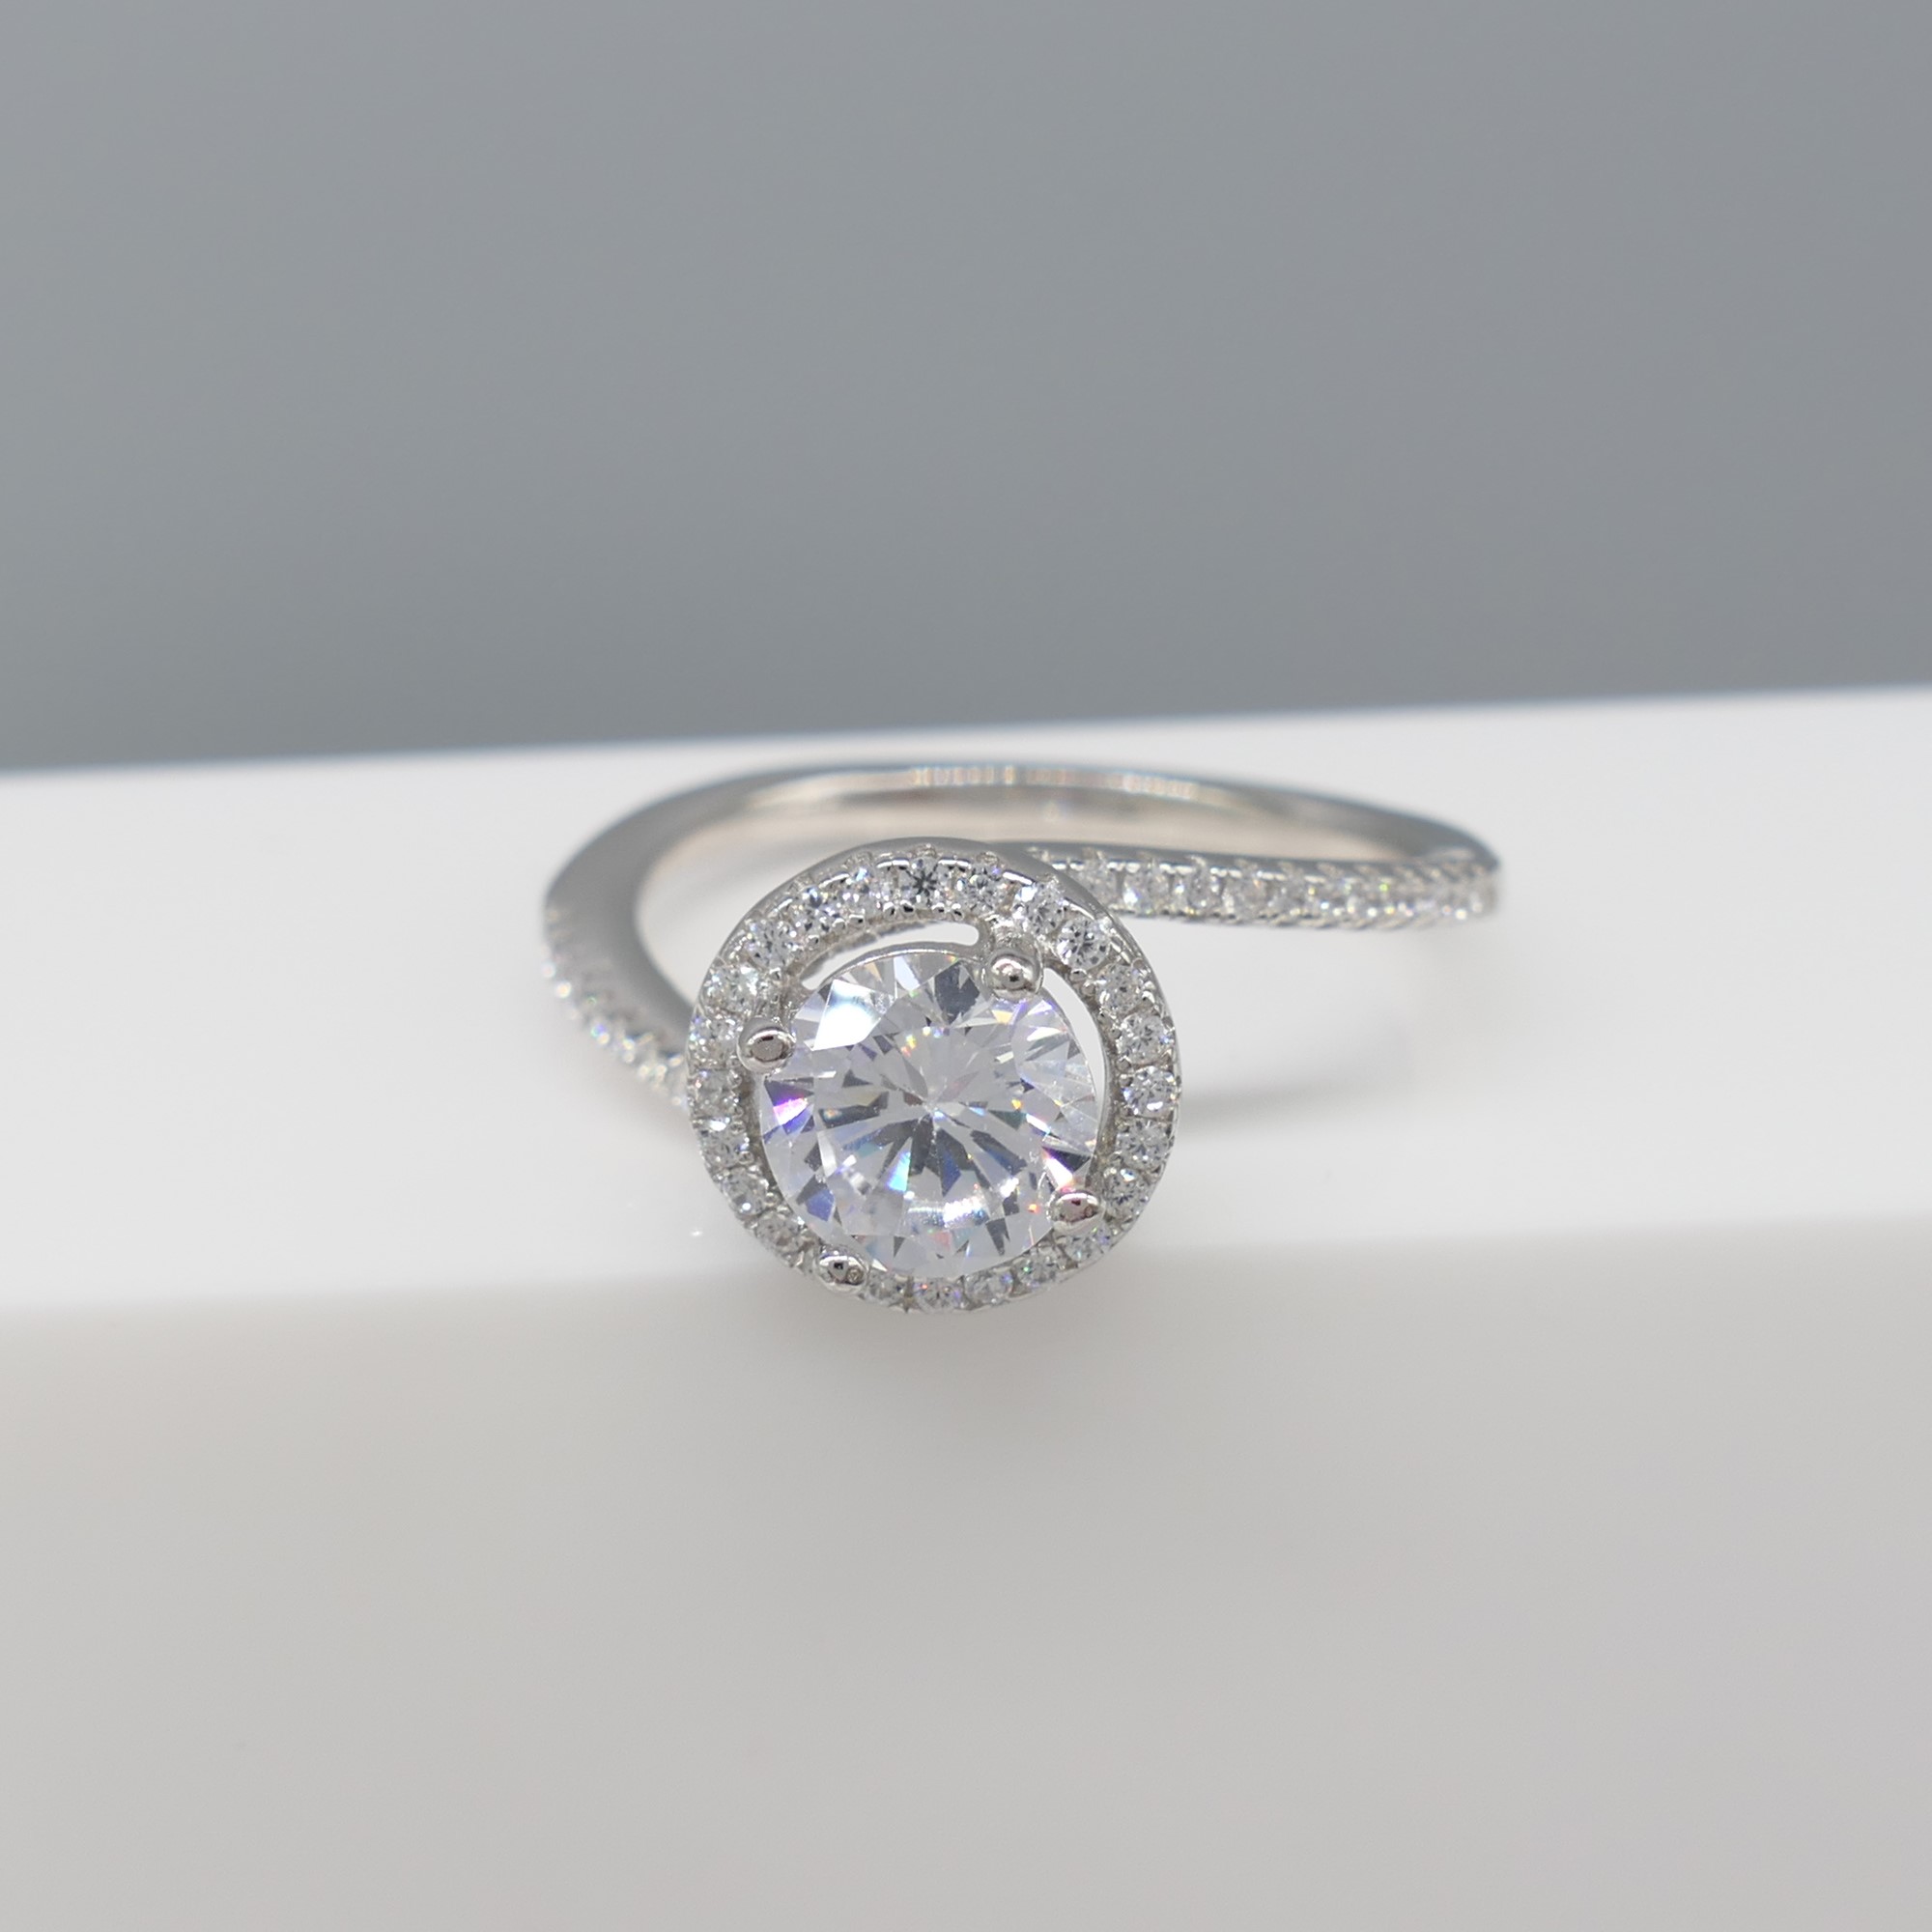 Silver cubic zirconia halo and twist dress ring - Image 3 of 6